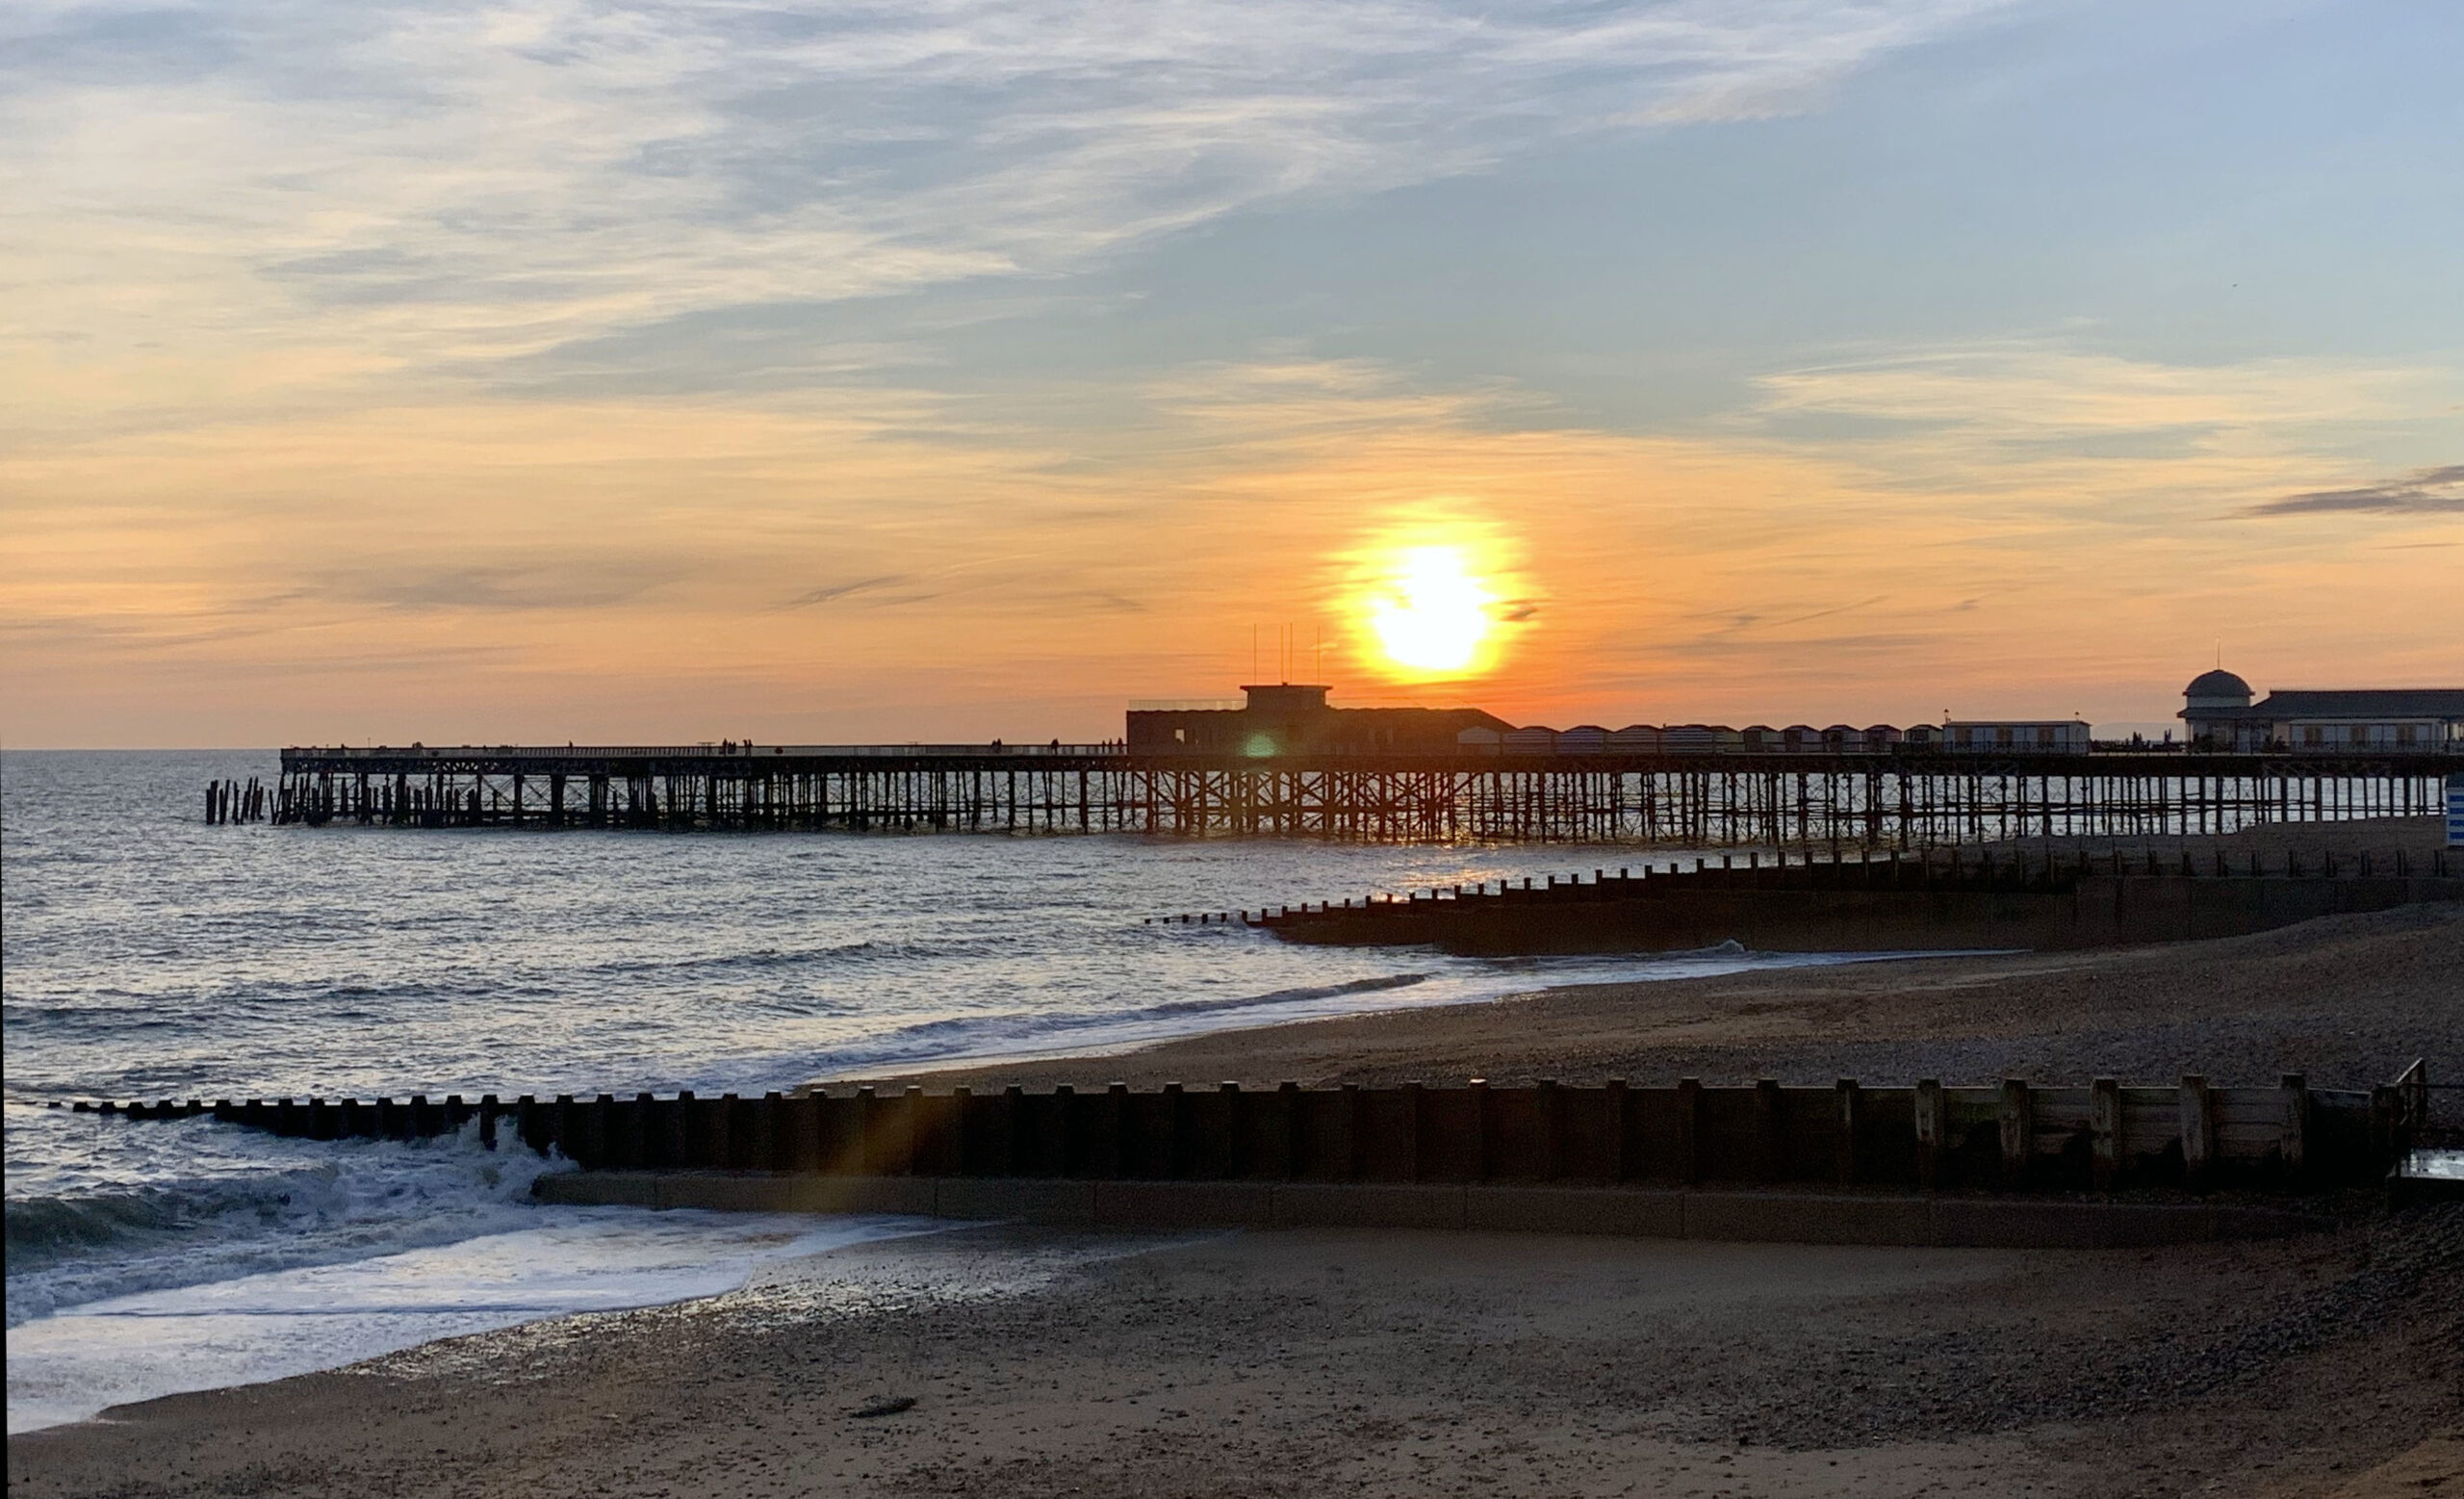 Piers – Bexhill-on-Sea in East Sussex